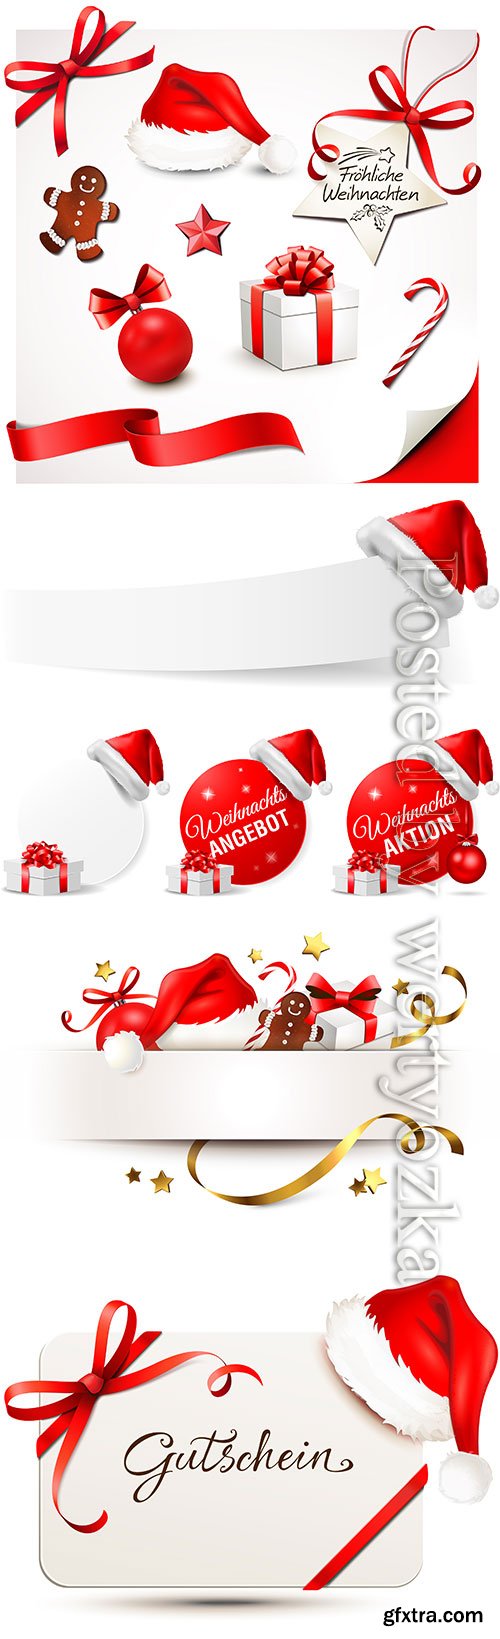 Christmas and New Year design elements in vector